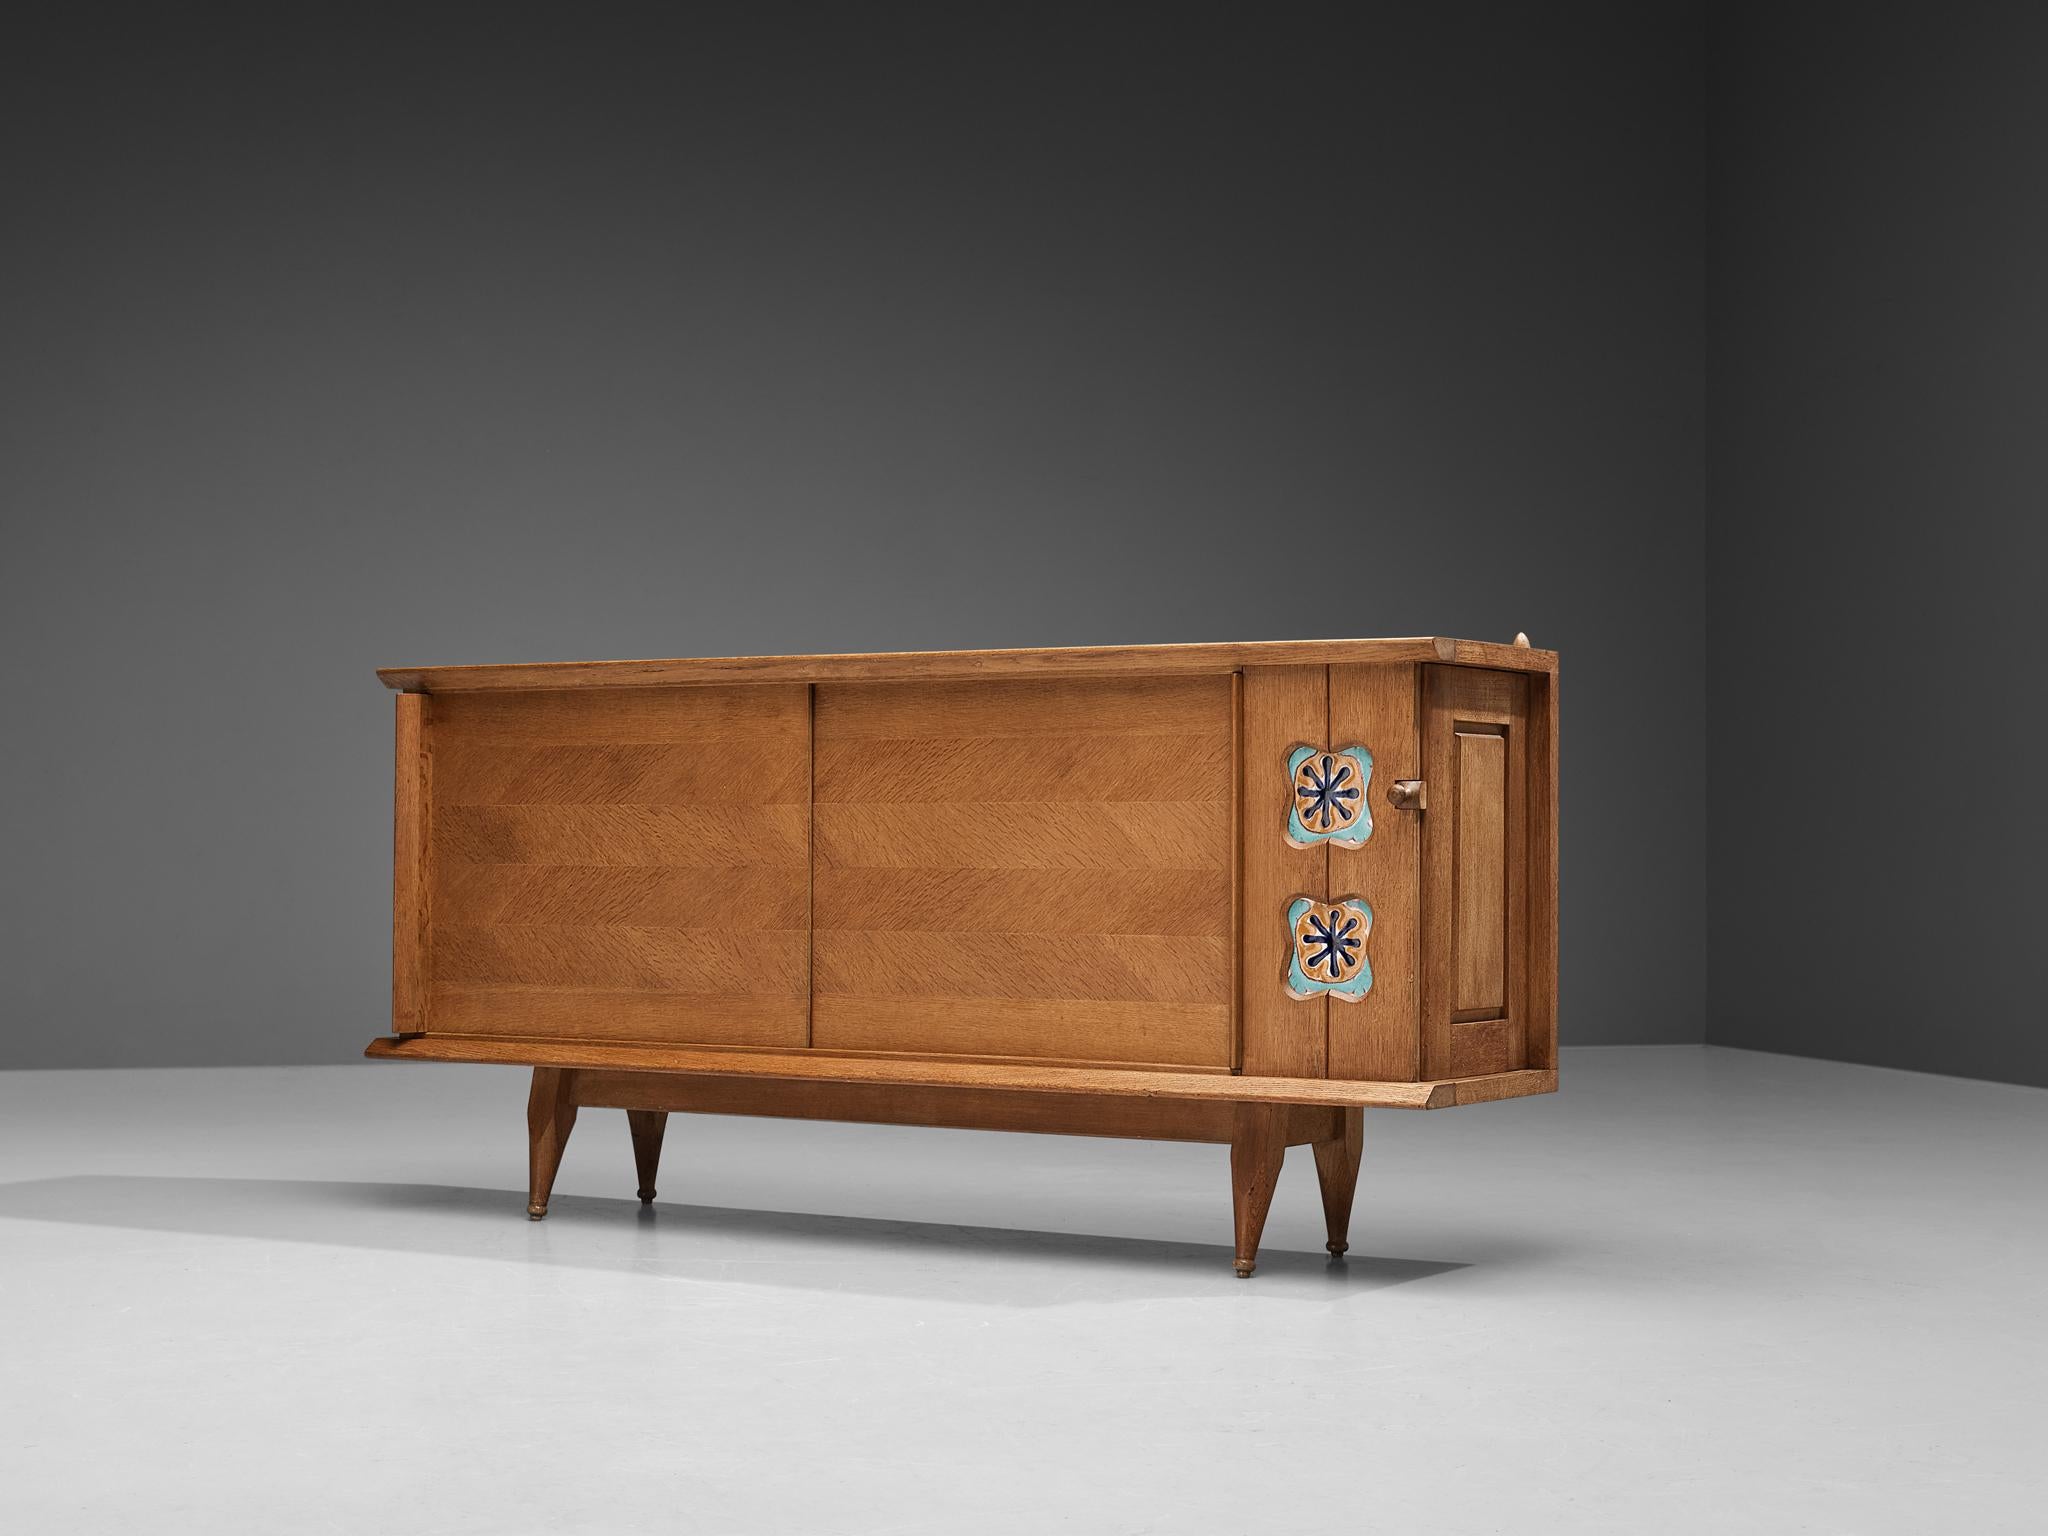 Guillerme et Chambron for Votre Maison, credenza, oak, ceramic tiles, France, 1960s

Characteristic sideboard in solid oak. This cabinet holds all the characteristics of the French designer duo Jacques Chambron and Robert Guillerme. As many of the